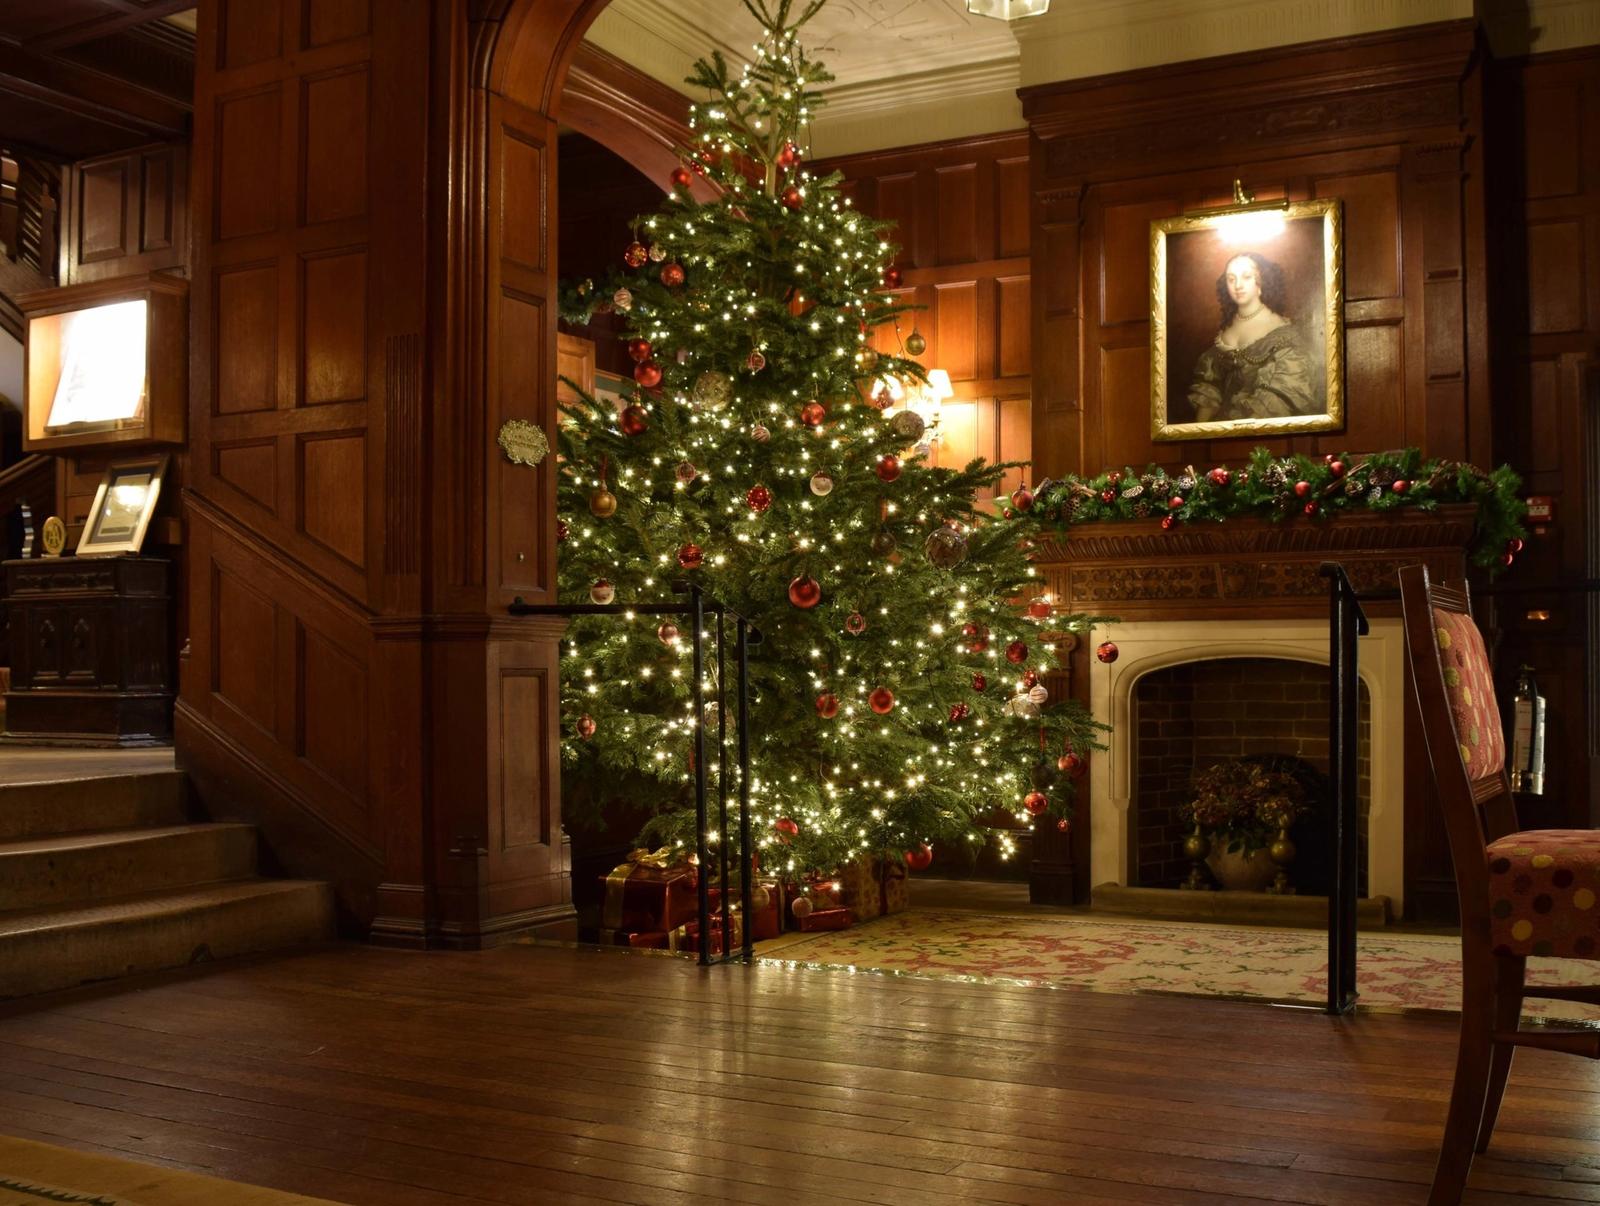 Five hotels for Christmas in the South East